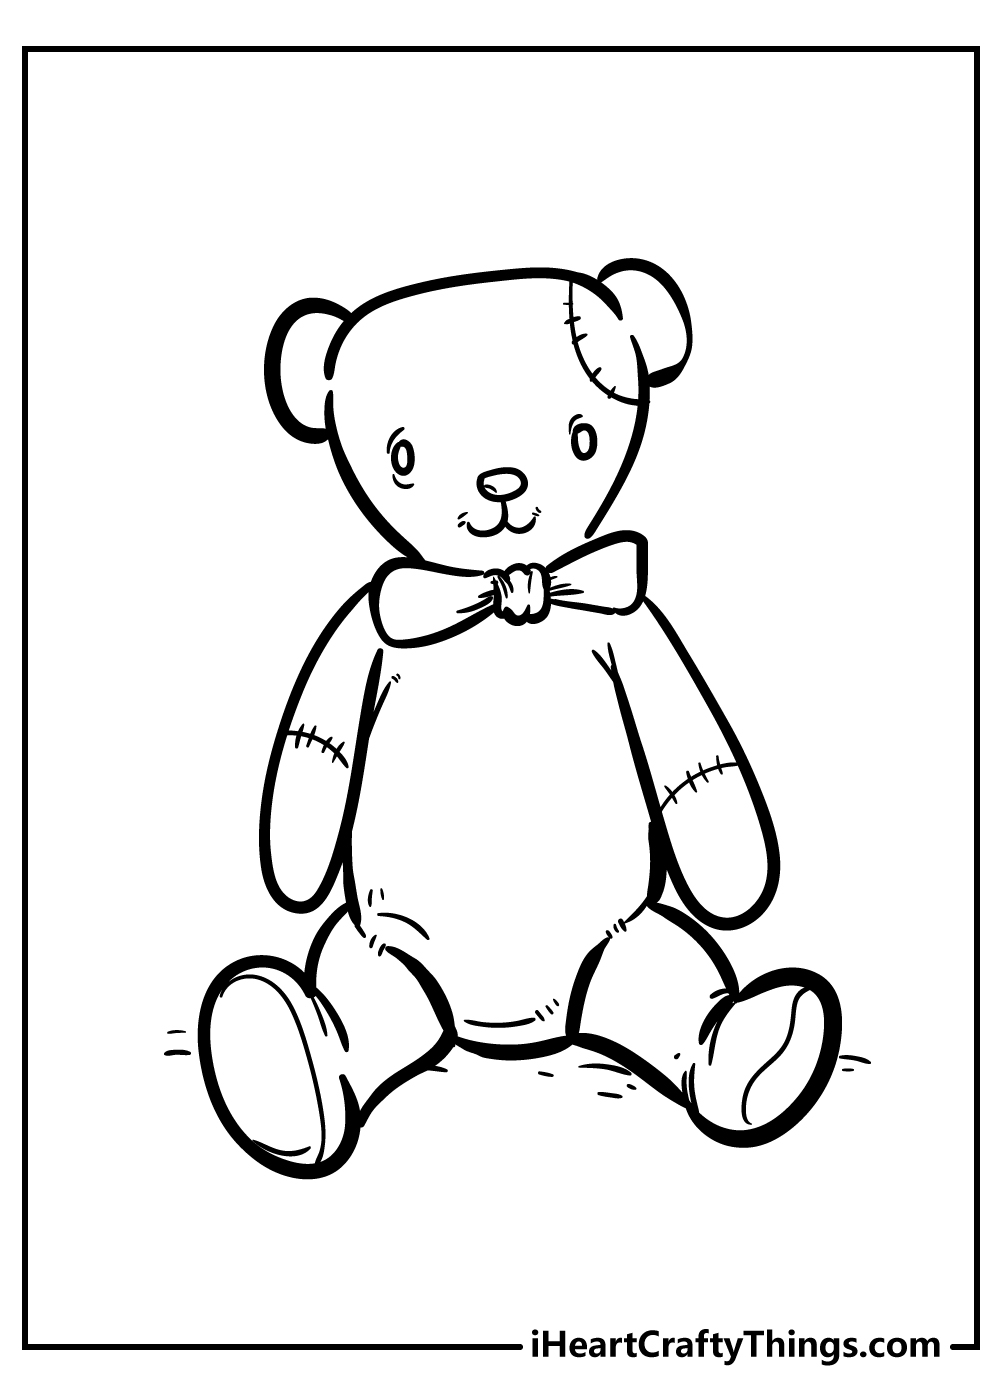 Teddy Bear Coloring Pages for kids free download